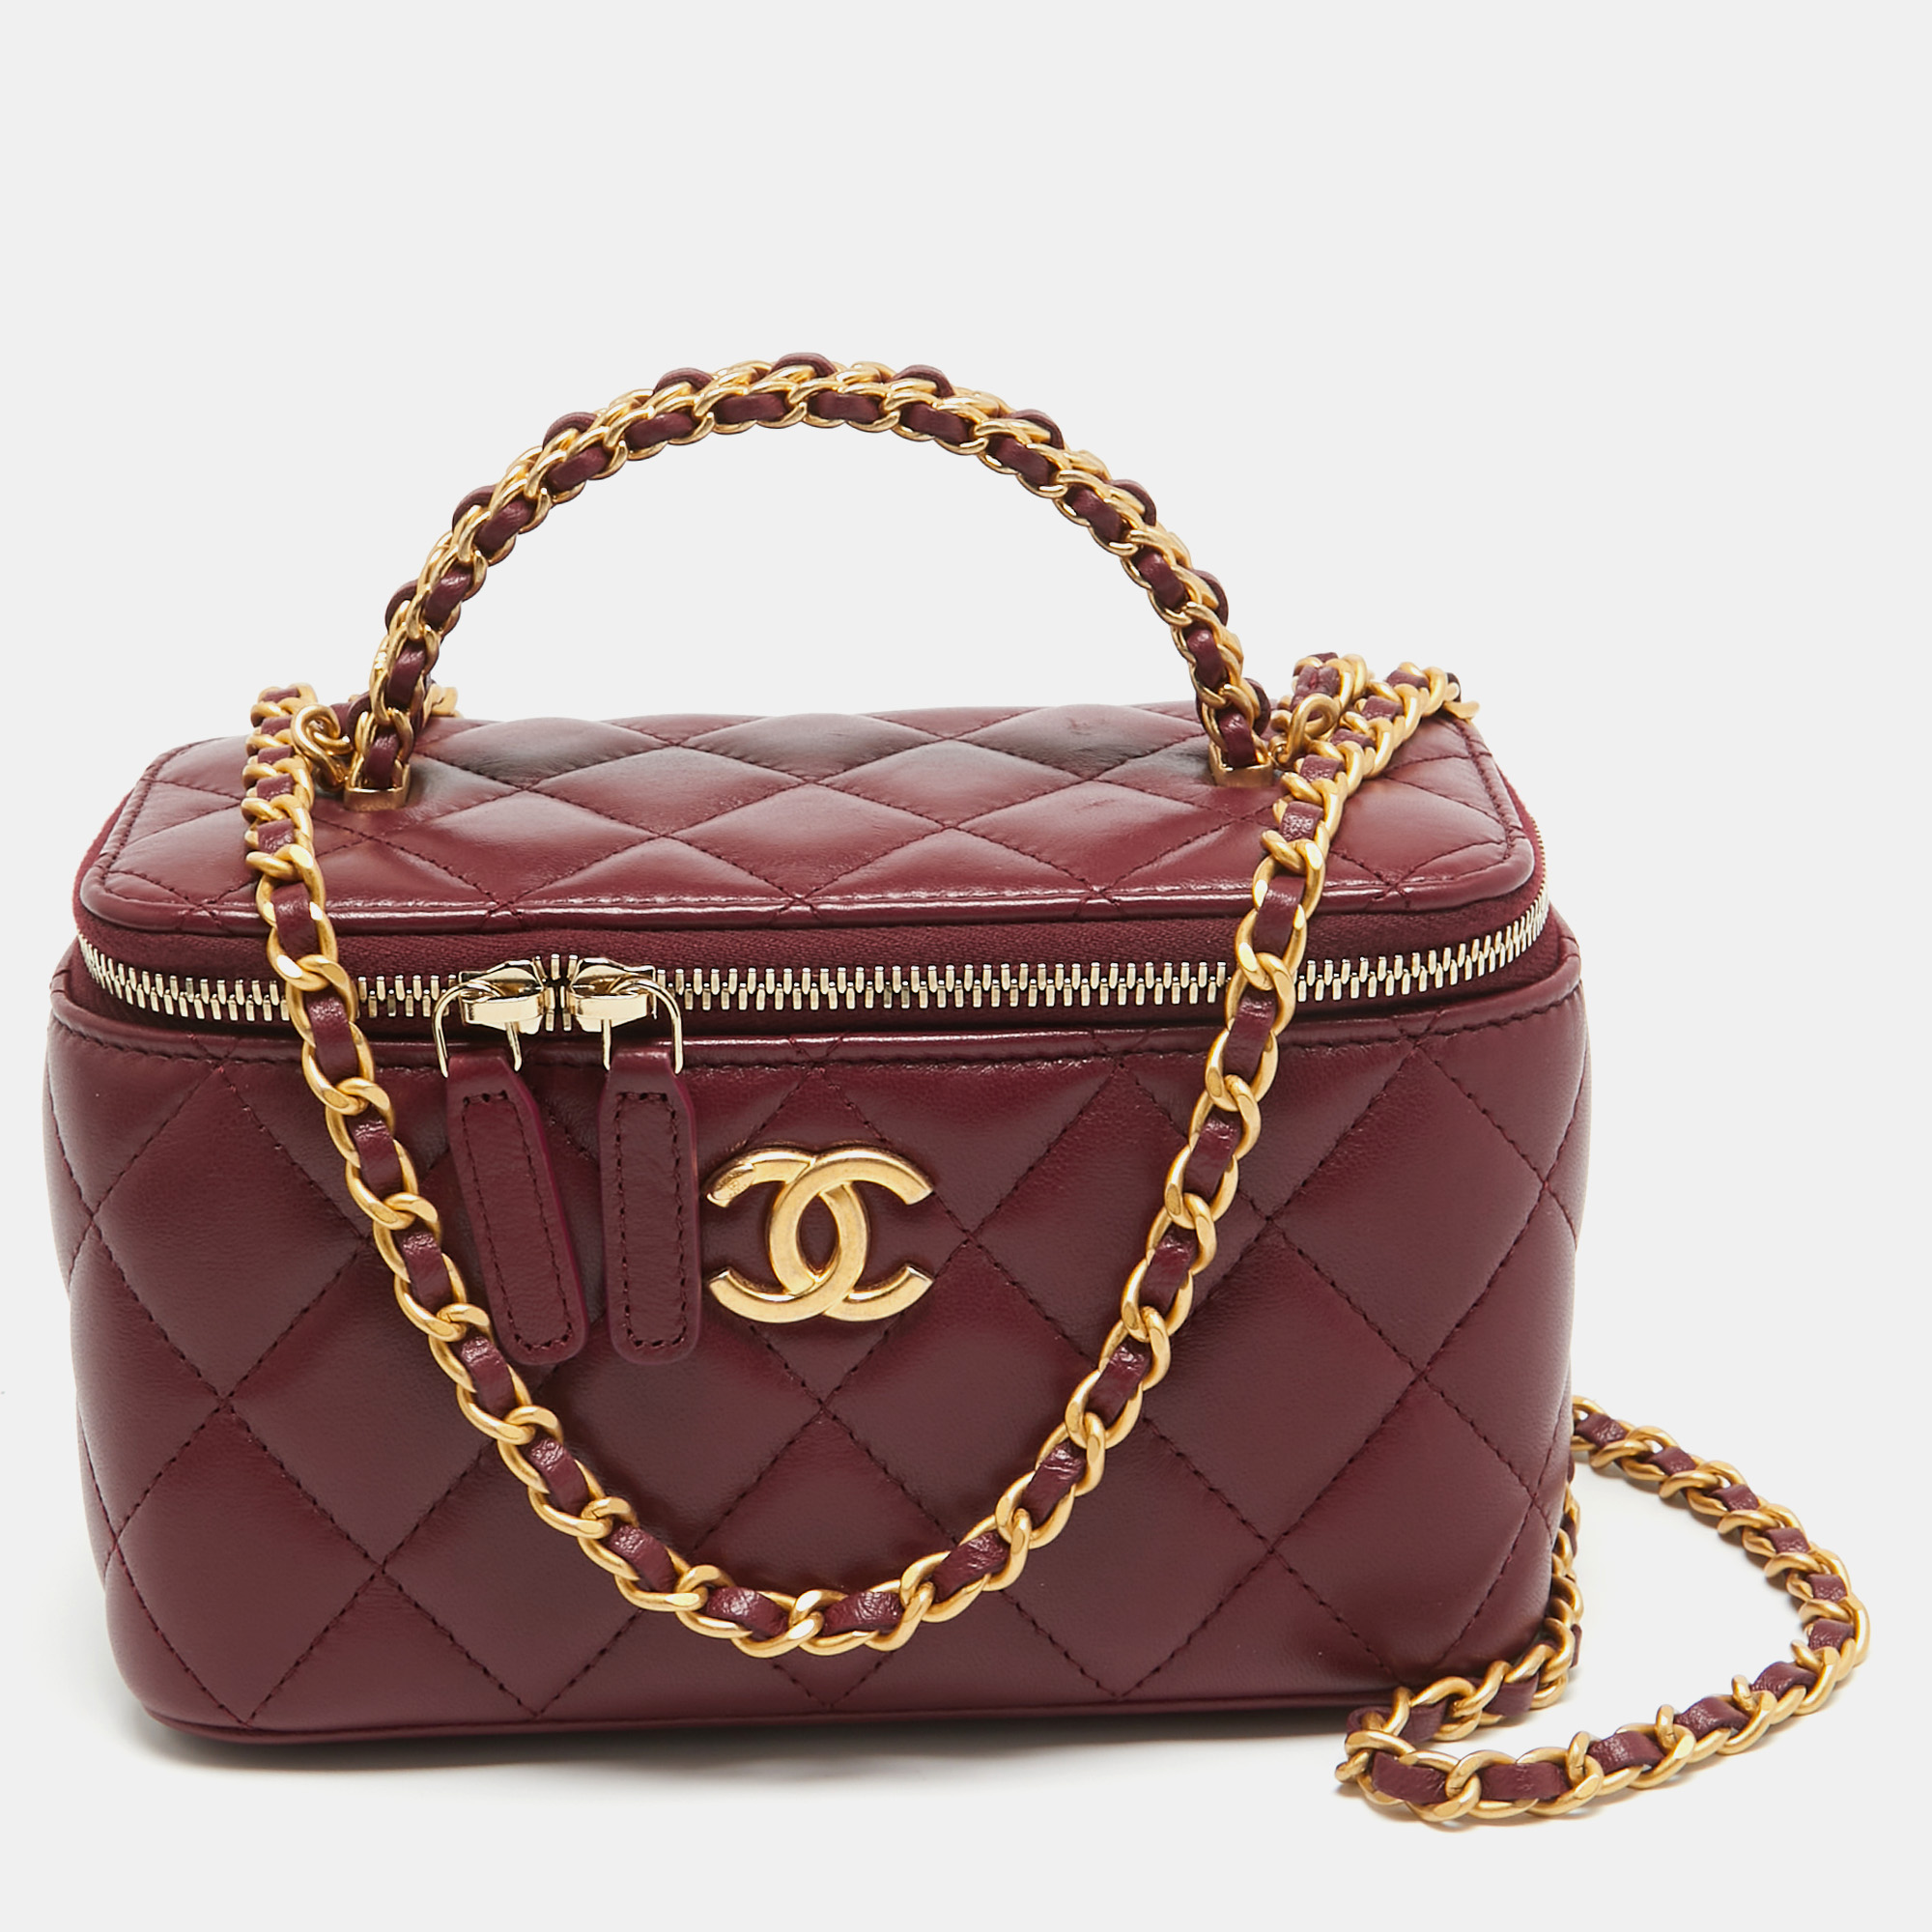 

Chanel Burgundy Quilted Leather Pick Me Up Vanity Bag